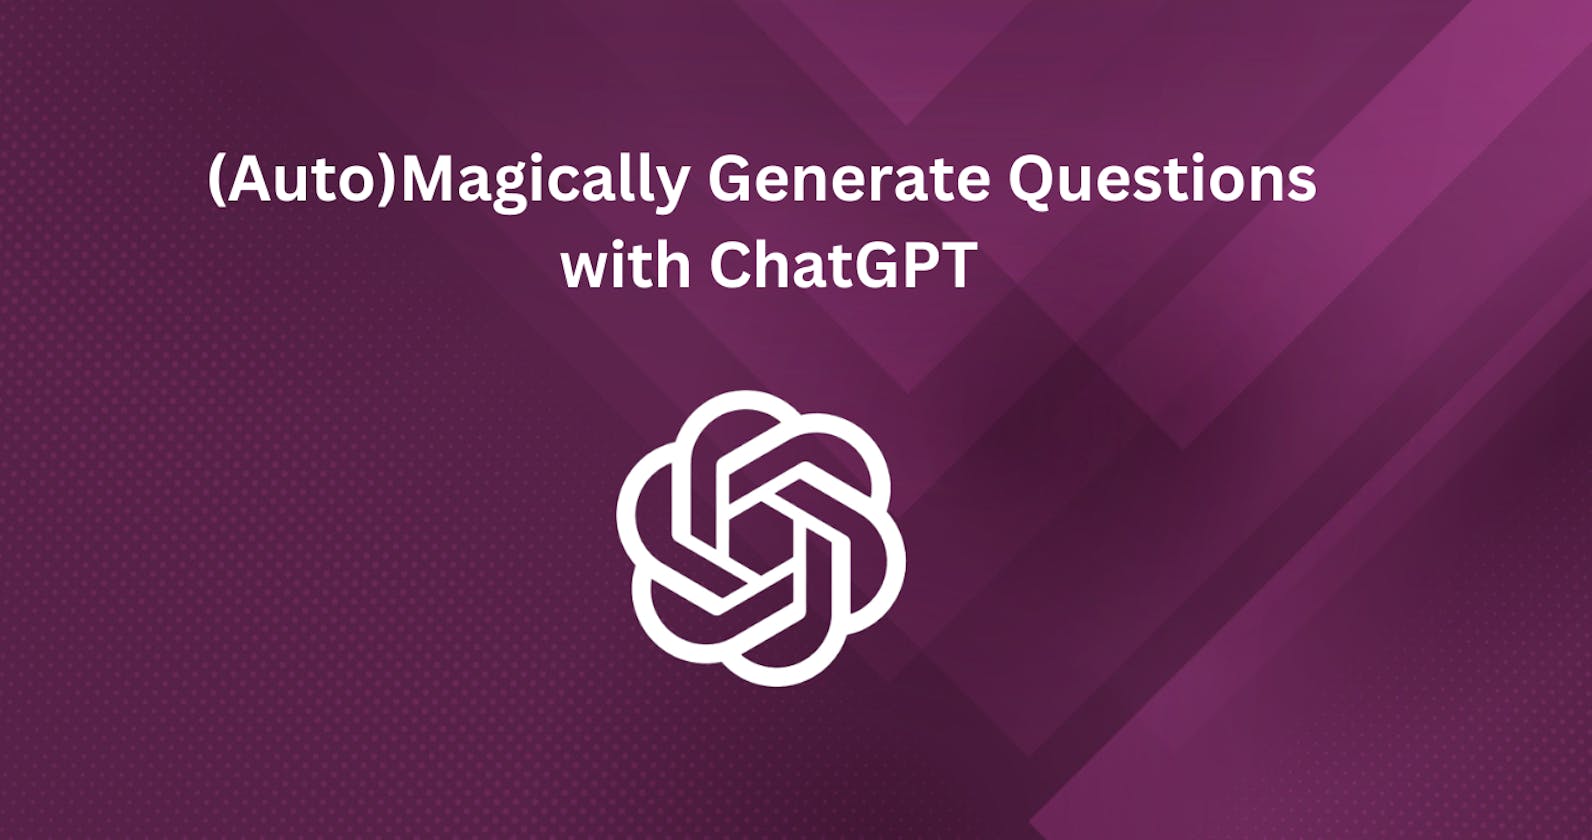 (Auto)Magically Generate Questions with ChatGPT